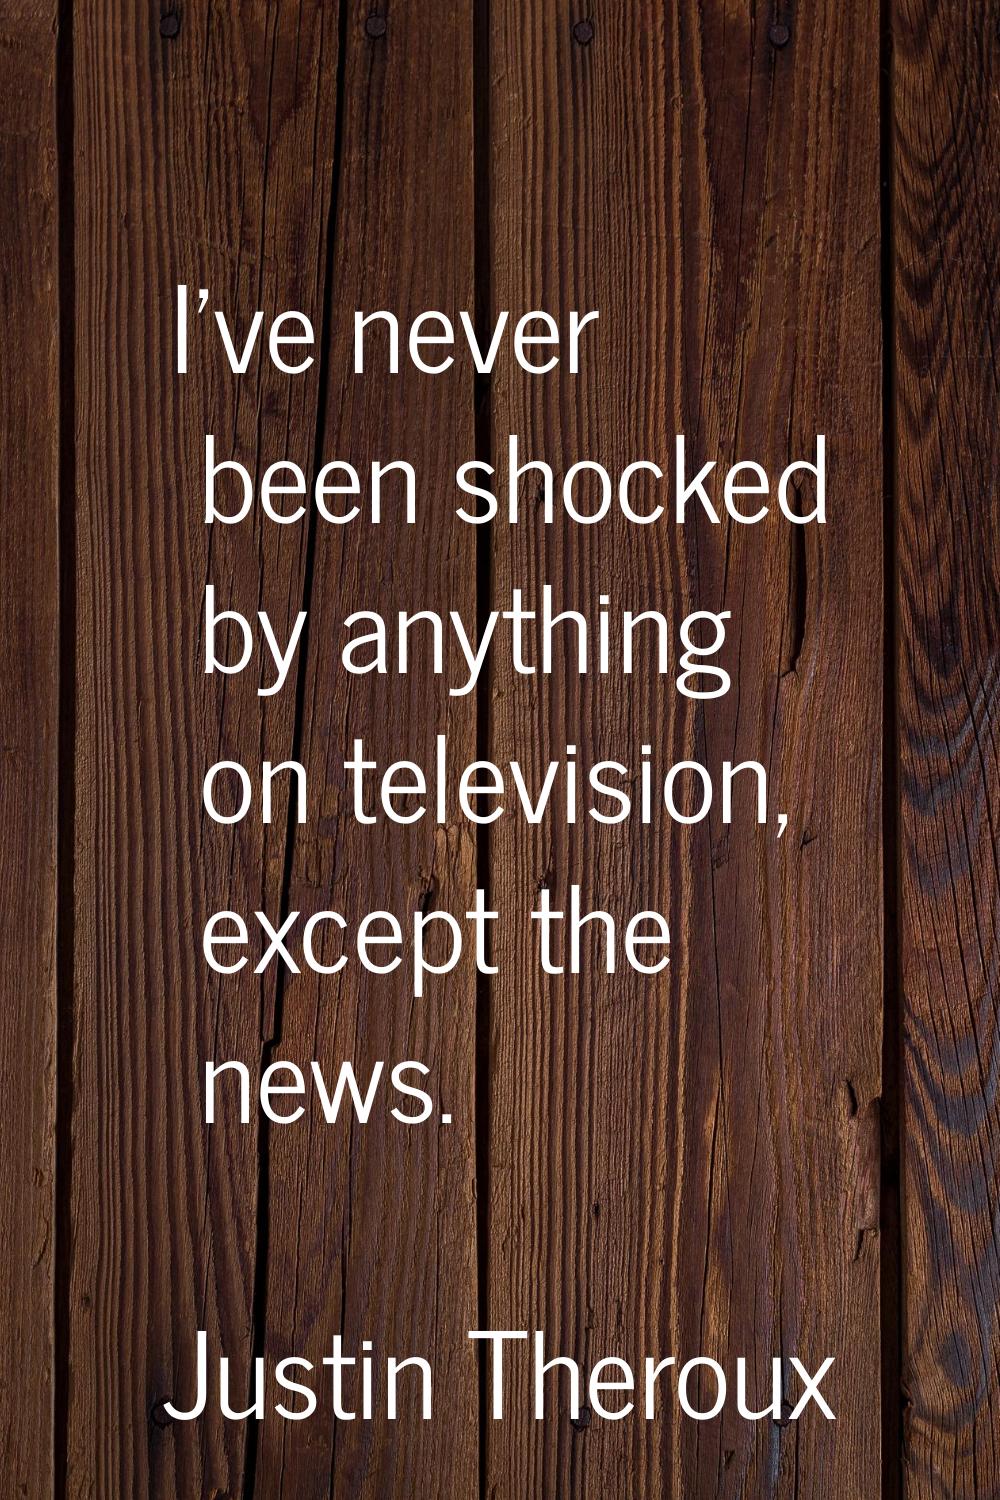 I've never been shocked by anything on television, except the news.